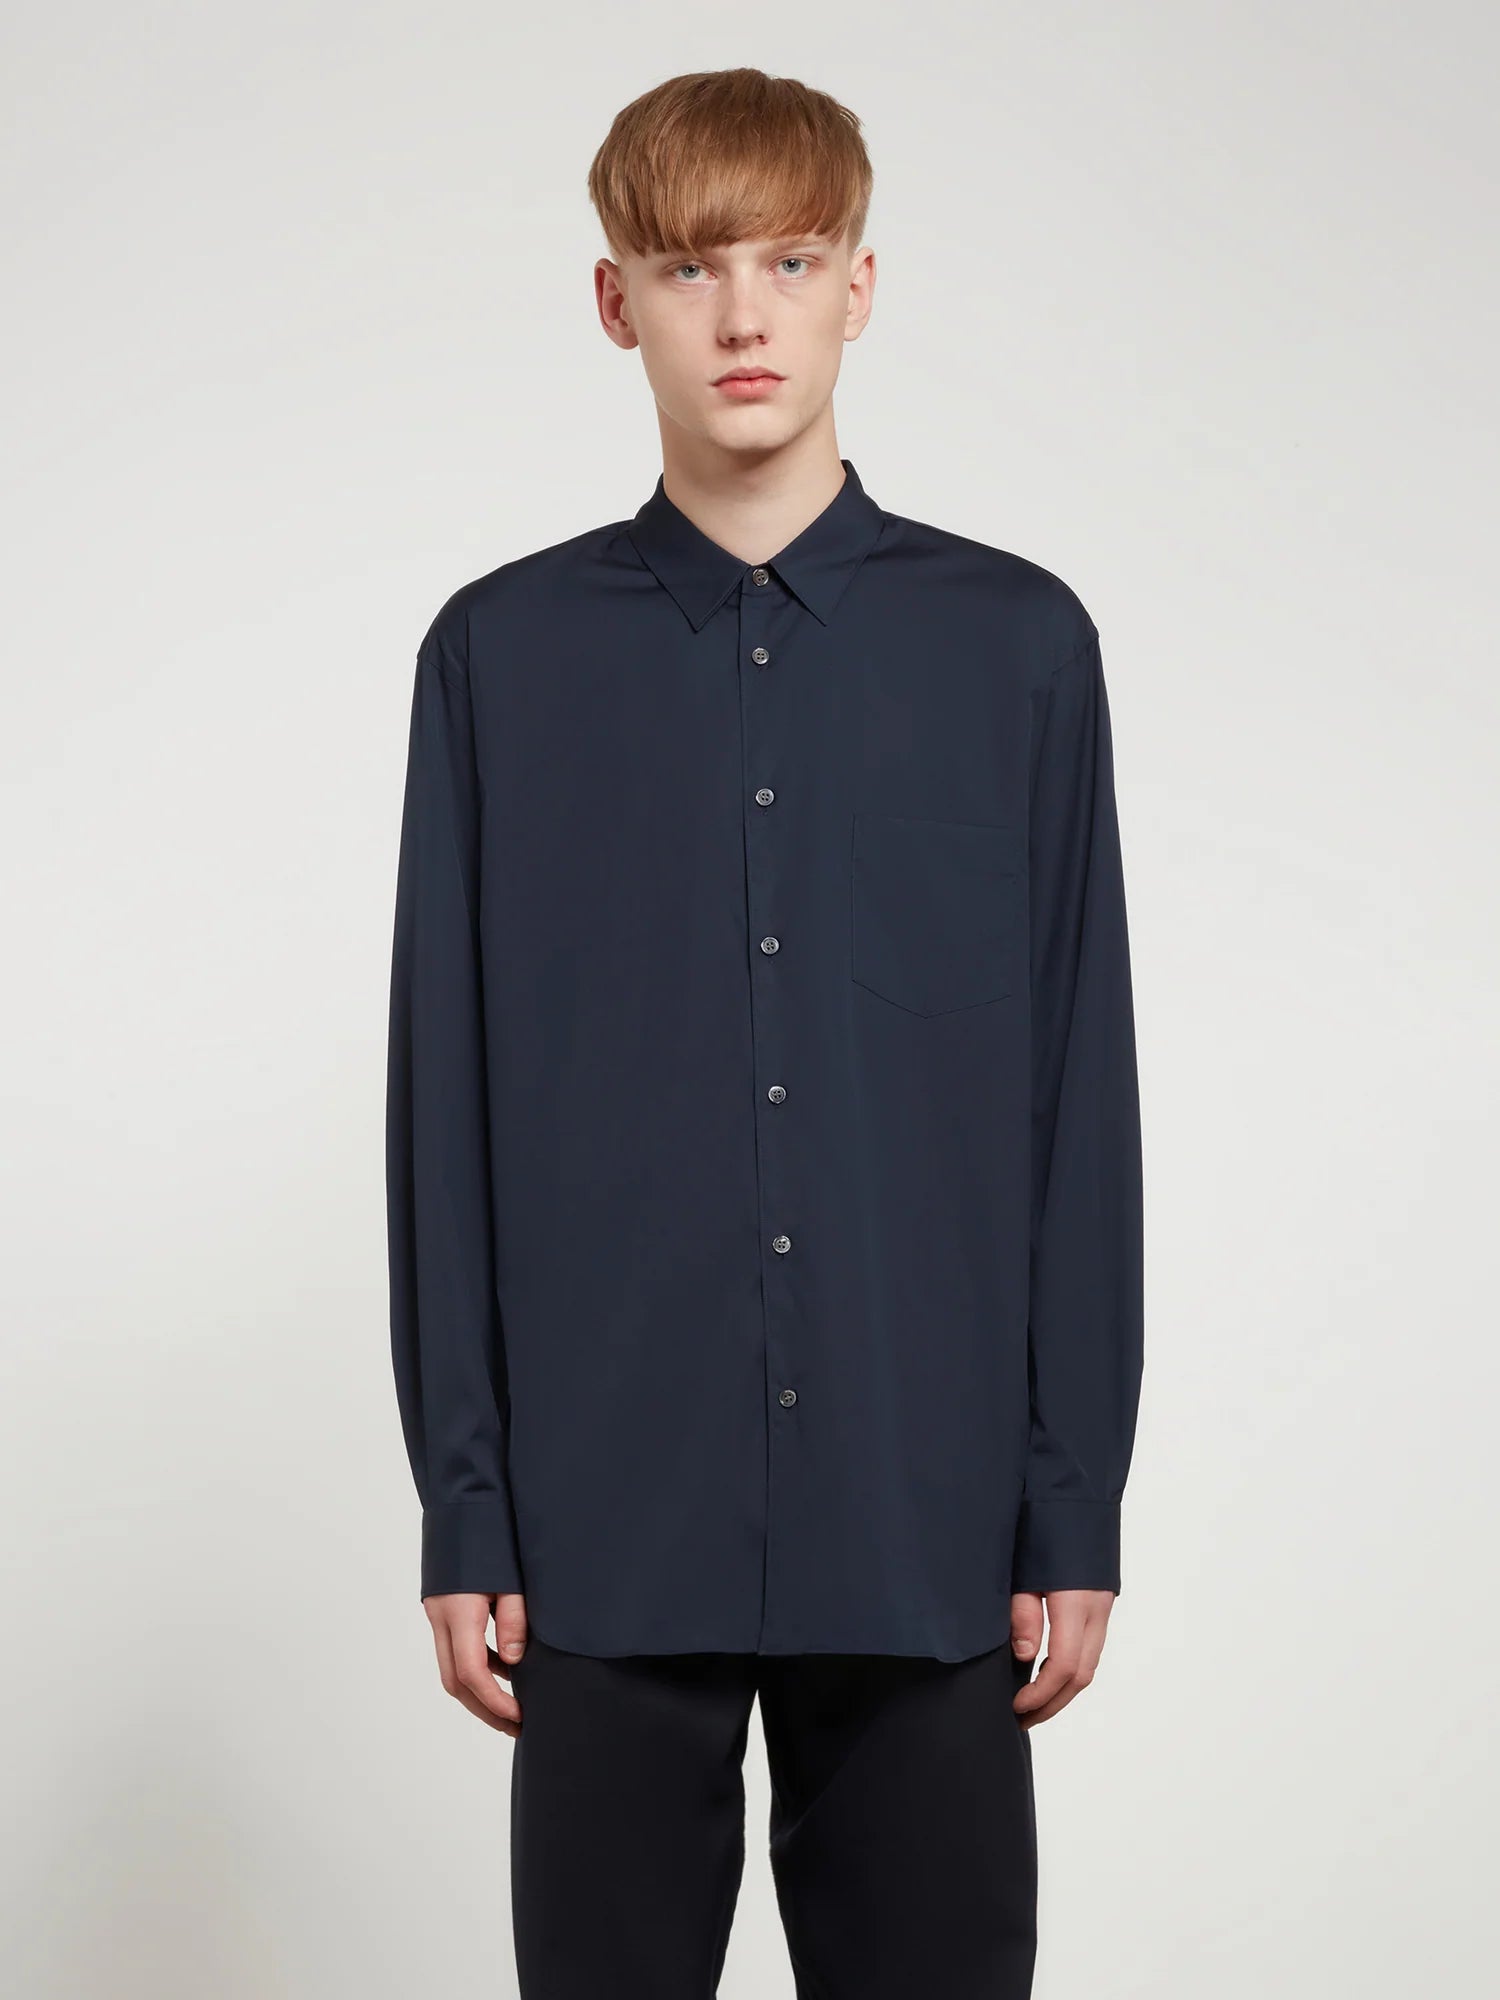 CDG SHIRT FOREVER - Classic Fit Fine Wool Shirt - (Navy) view 3